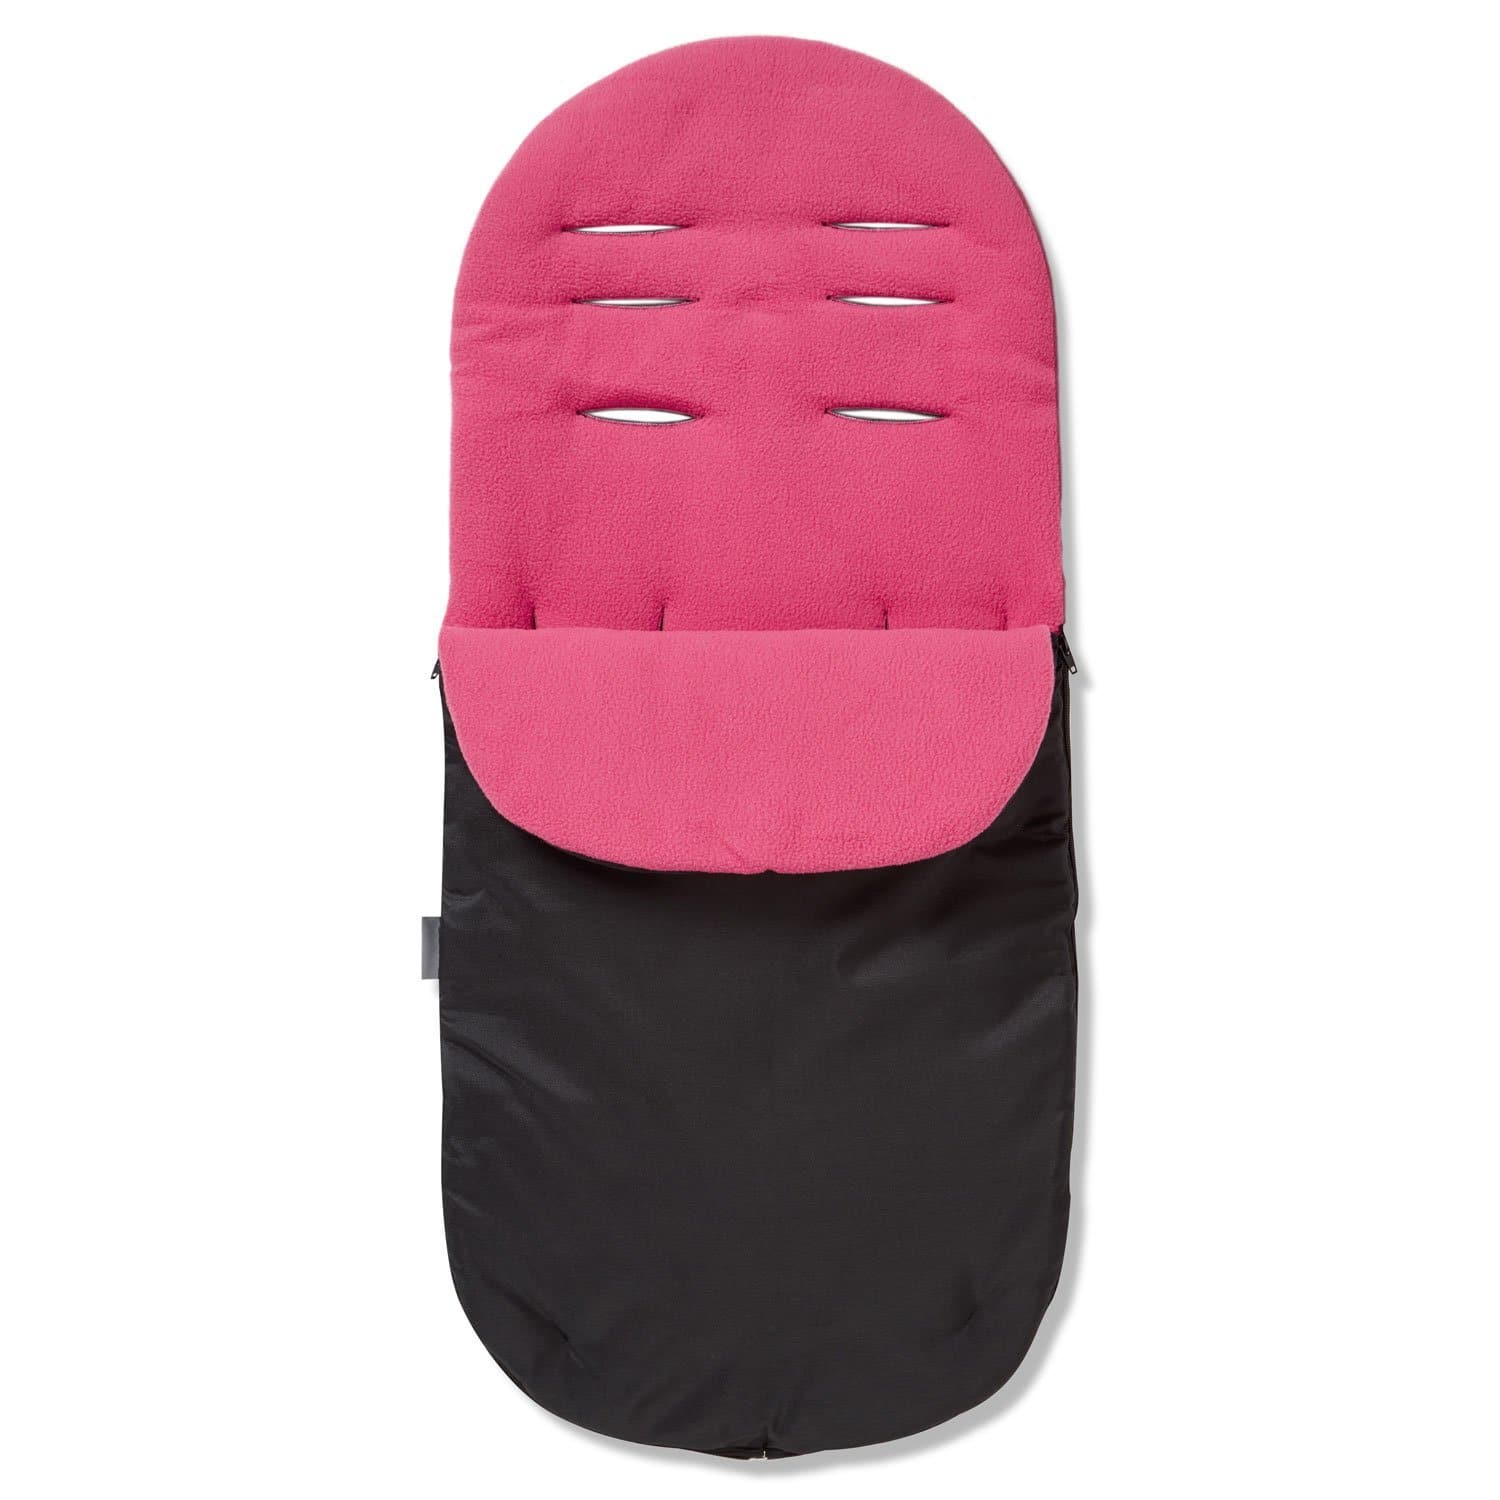 Footmuff / Cosy Toes Compatible with Unilove - Dark Pink / Fits All Models | For Your Little One